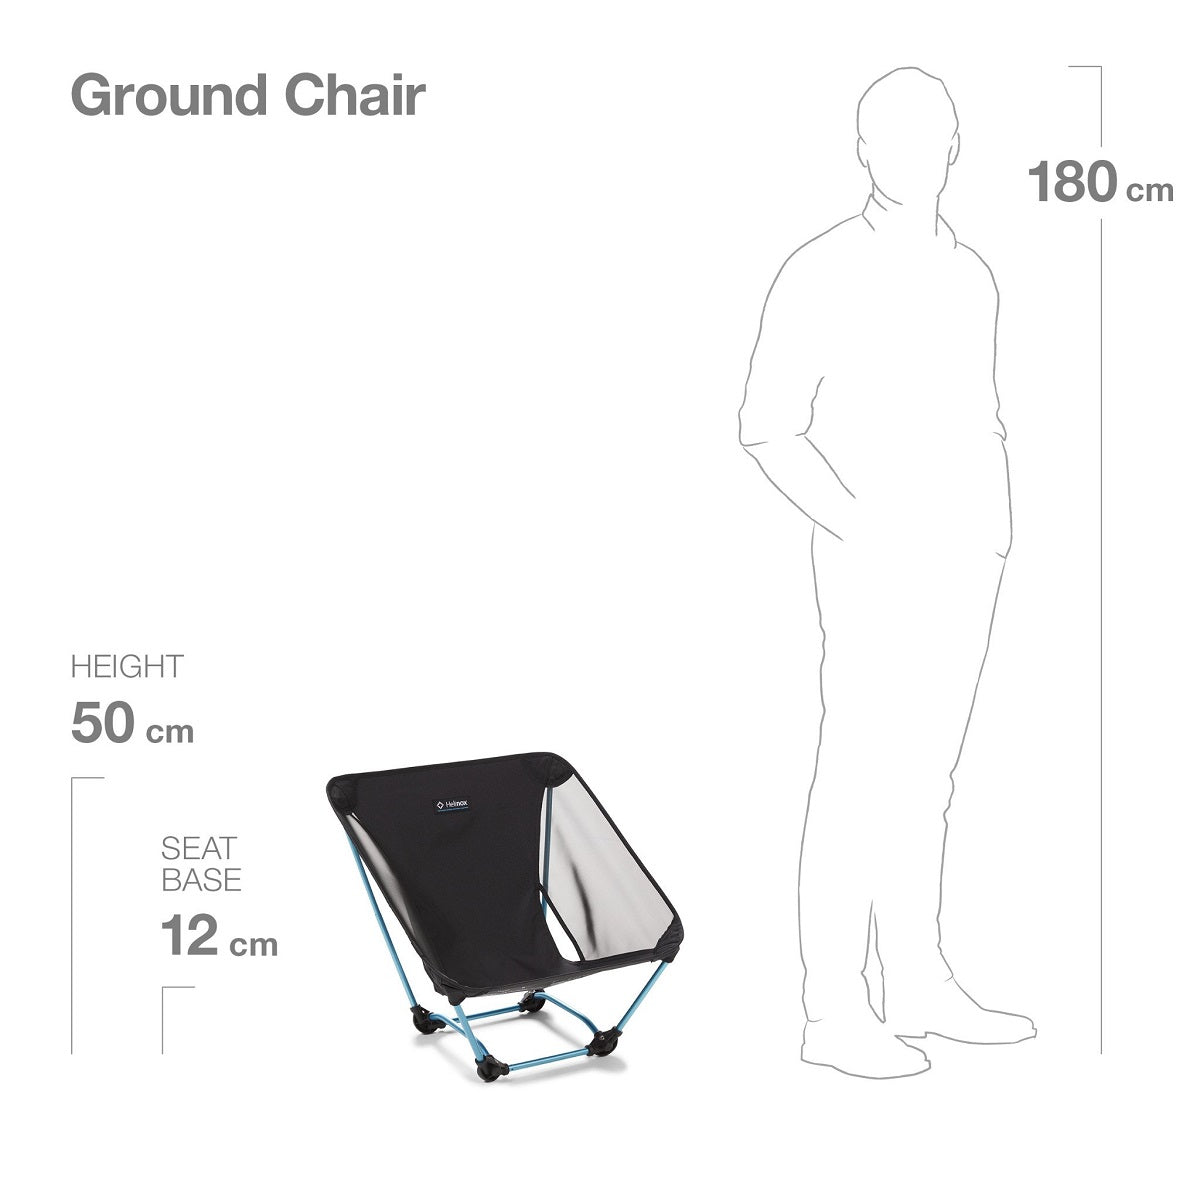 Helinox Ground Chair overview